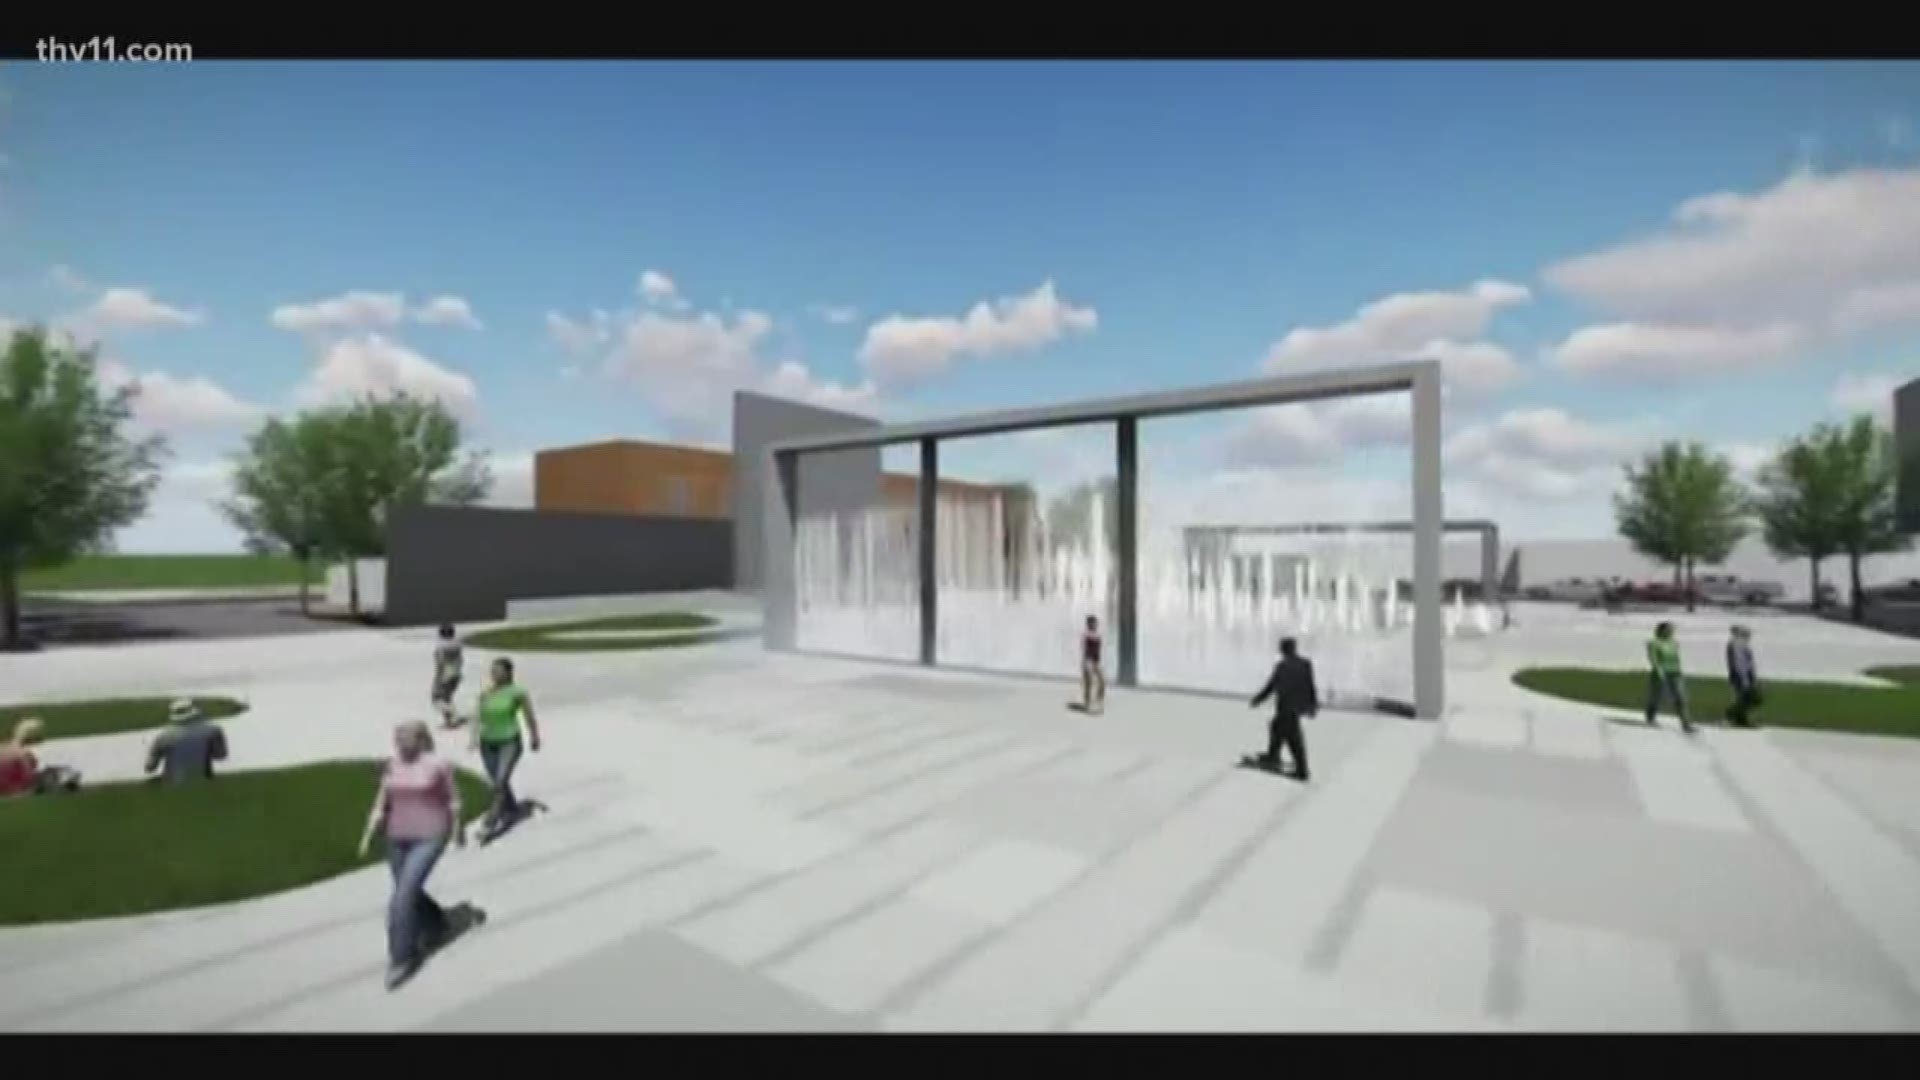 The public will vote on their favorite name for a planned plaza in North Little Rock.